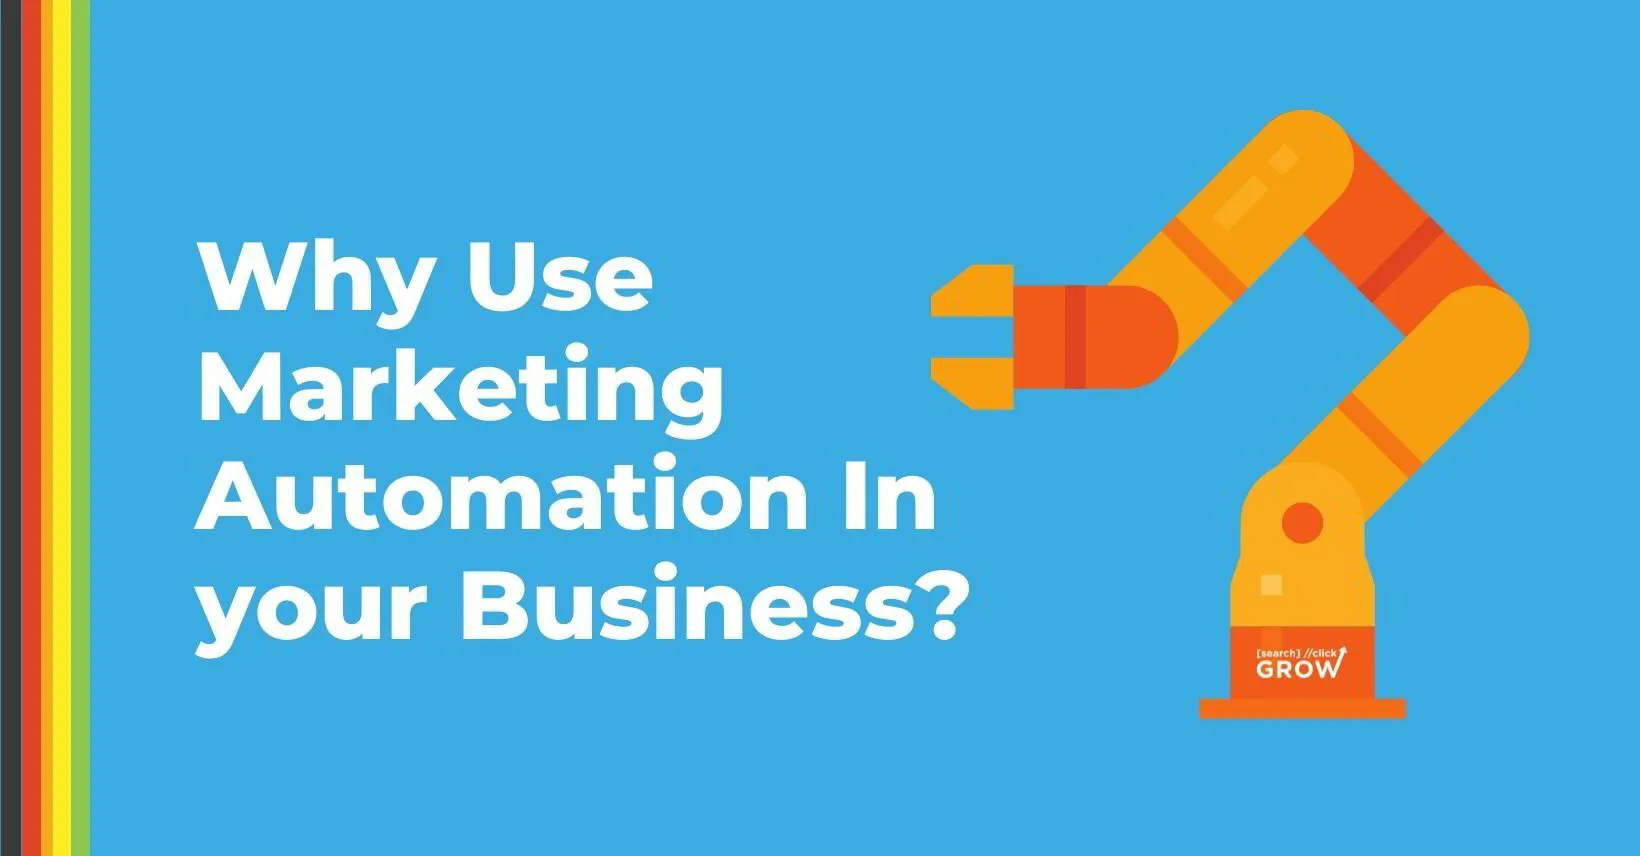 Why Use Marketing Automation In your Business